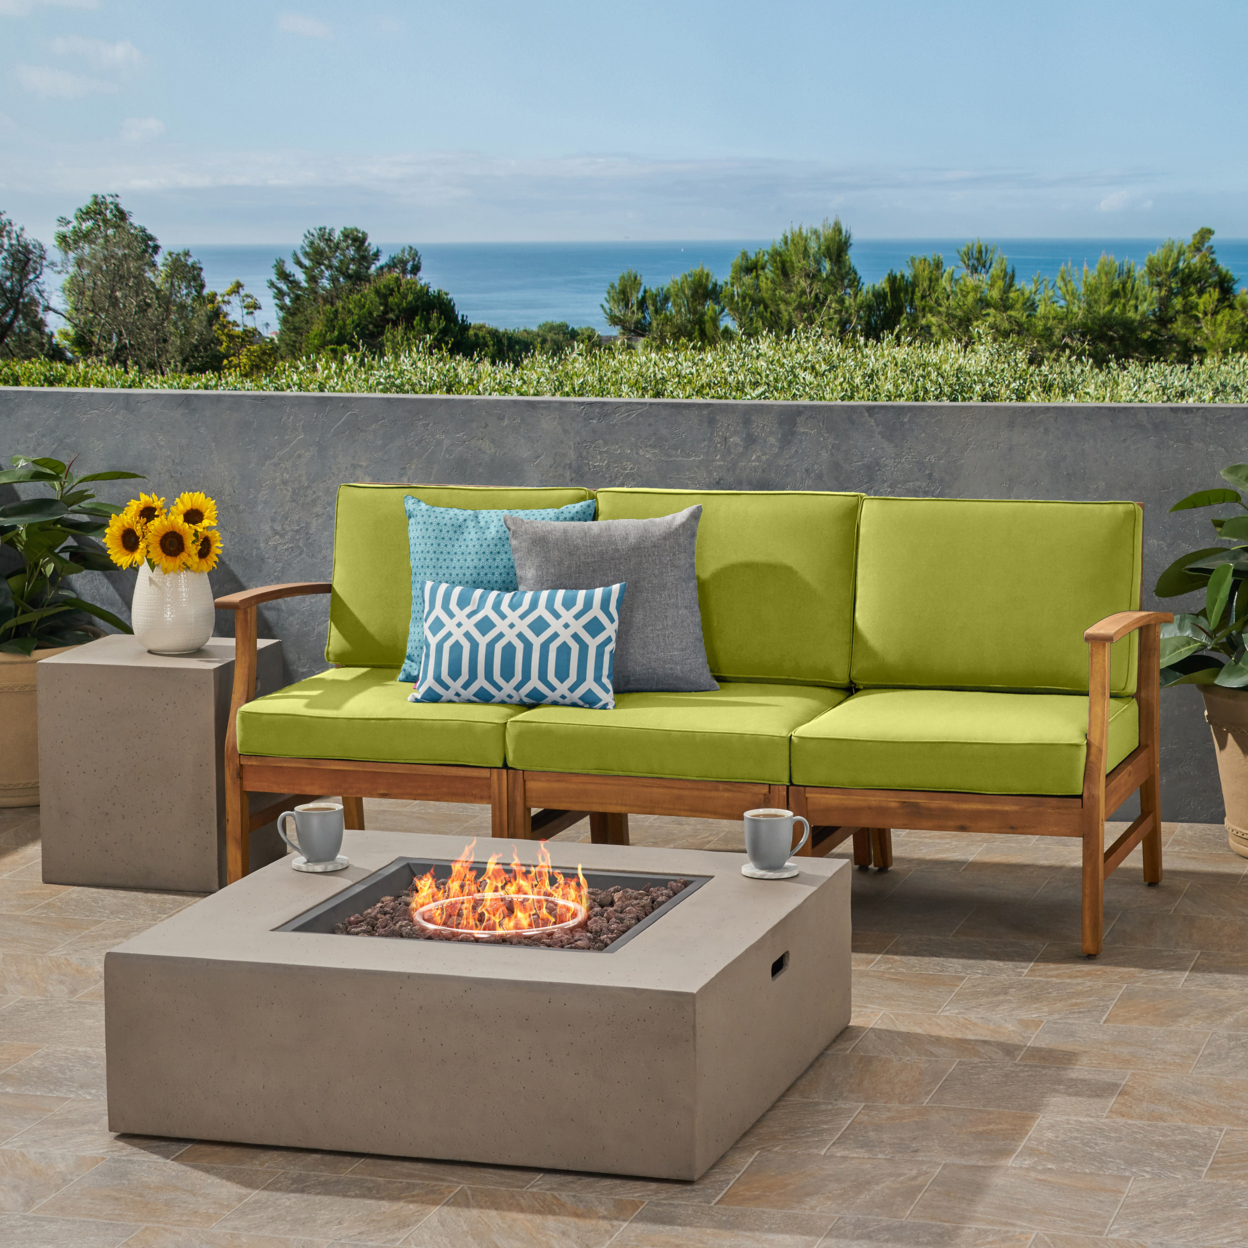 Sydney Outdoor 3 Seater Acacia Wood Sofa Set With Rectangular Fire Table And Tank Holder - Teak + Blue + Light Gray